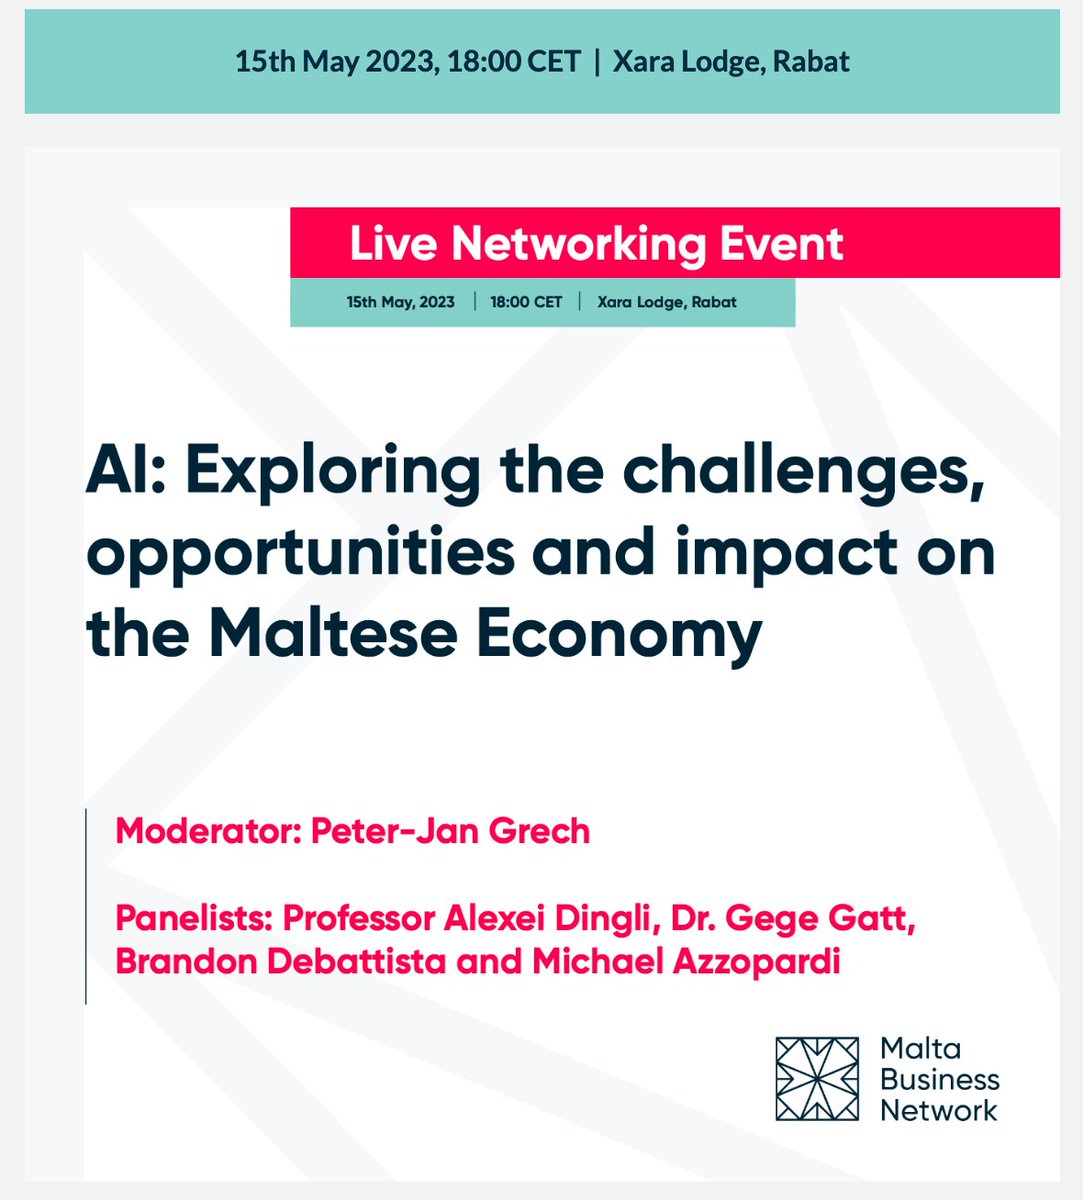 Join this @MaltaBN event on Monday to explore the potential impact of #AI on Malta's economy. I'll share the stage with @alexieidingli, Michael Azzopardi from @EYnews, Peter Grech & Brandon Debattista📍Xara Lodge, 15 May, 6pm. Register here https://t.co/54HgMVV6l1 #AIFutureMalta